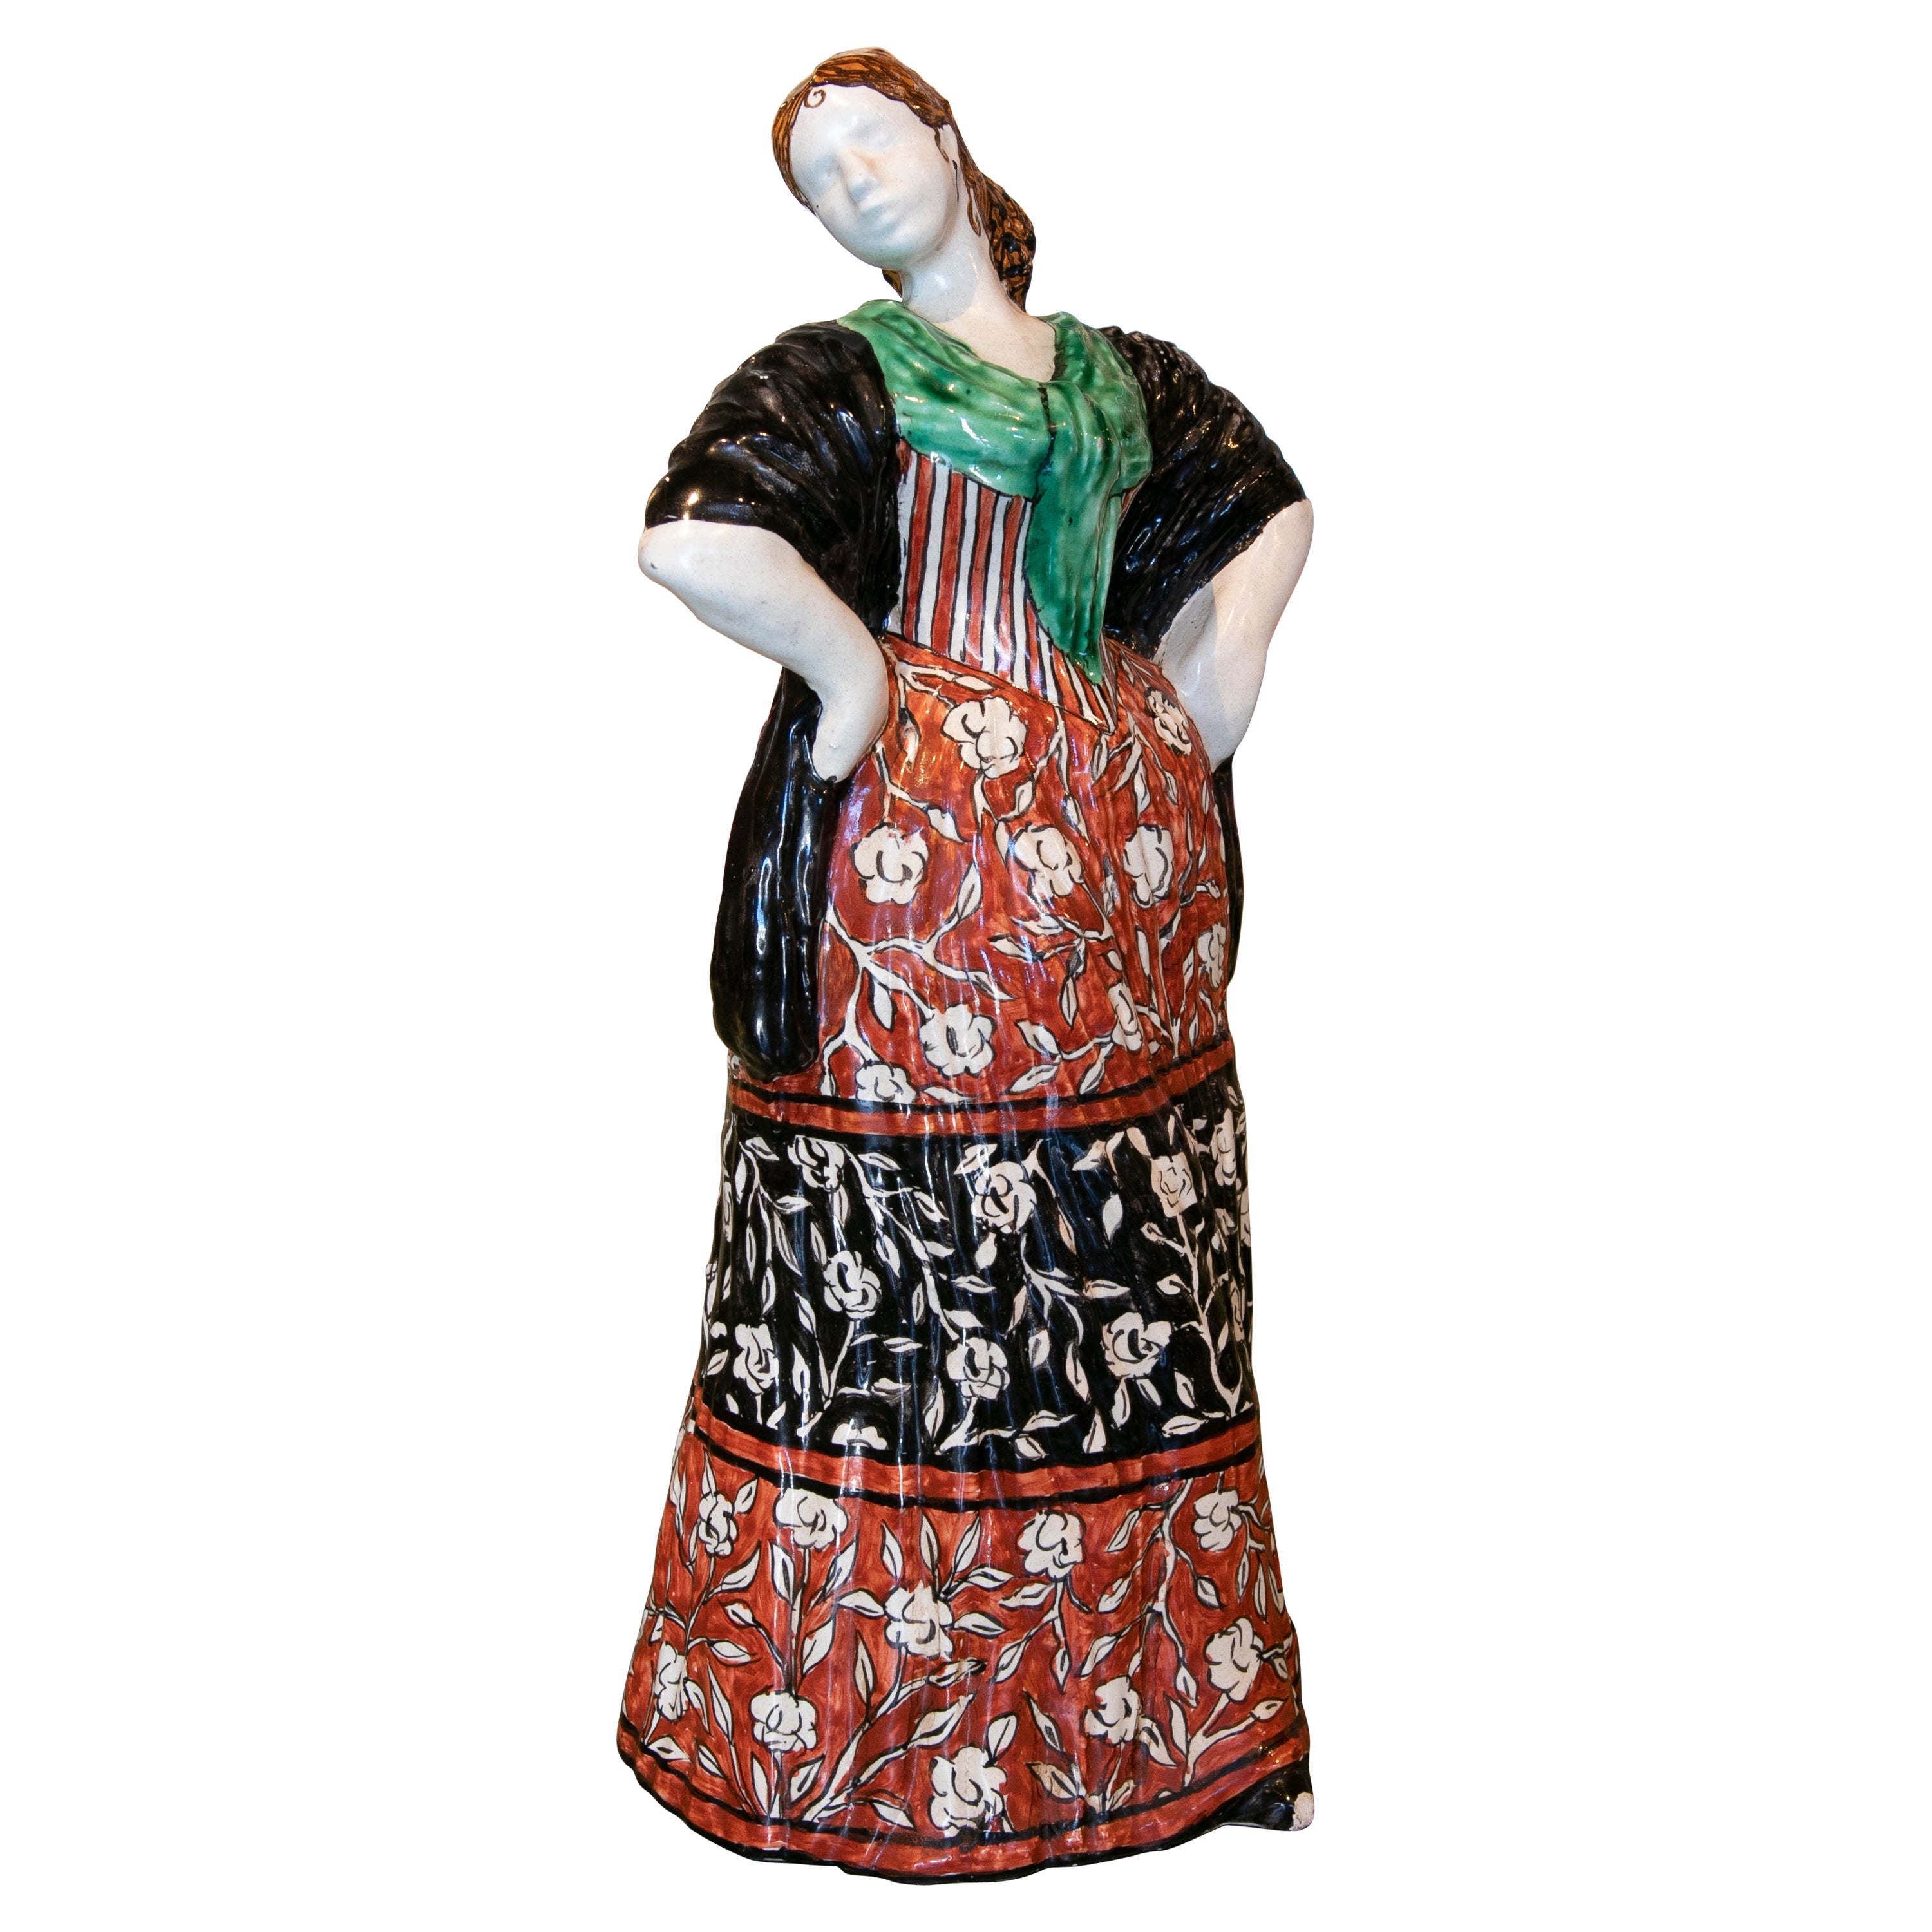 1970s Handpainted Glazed Ceramic Sculpture of a Woman in Typical Clothing For Sale